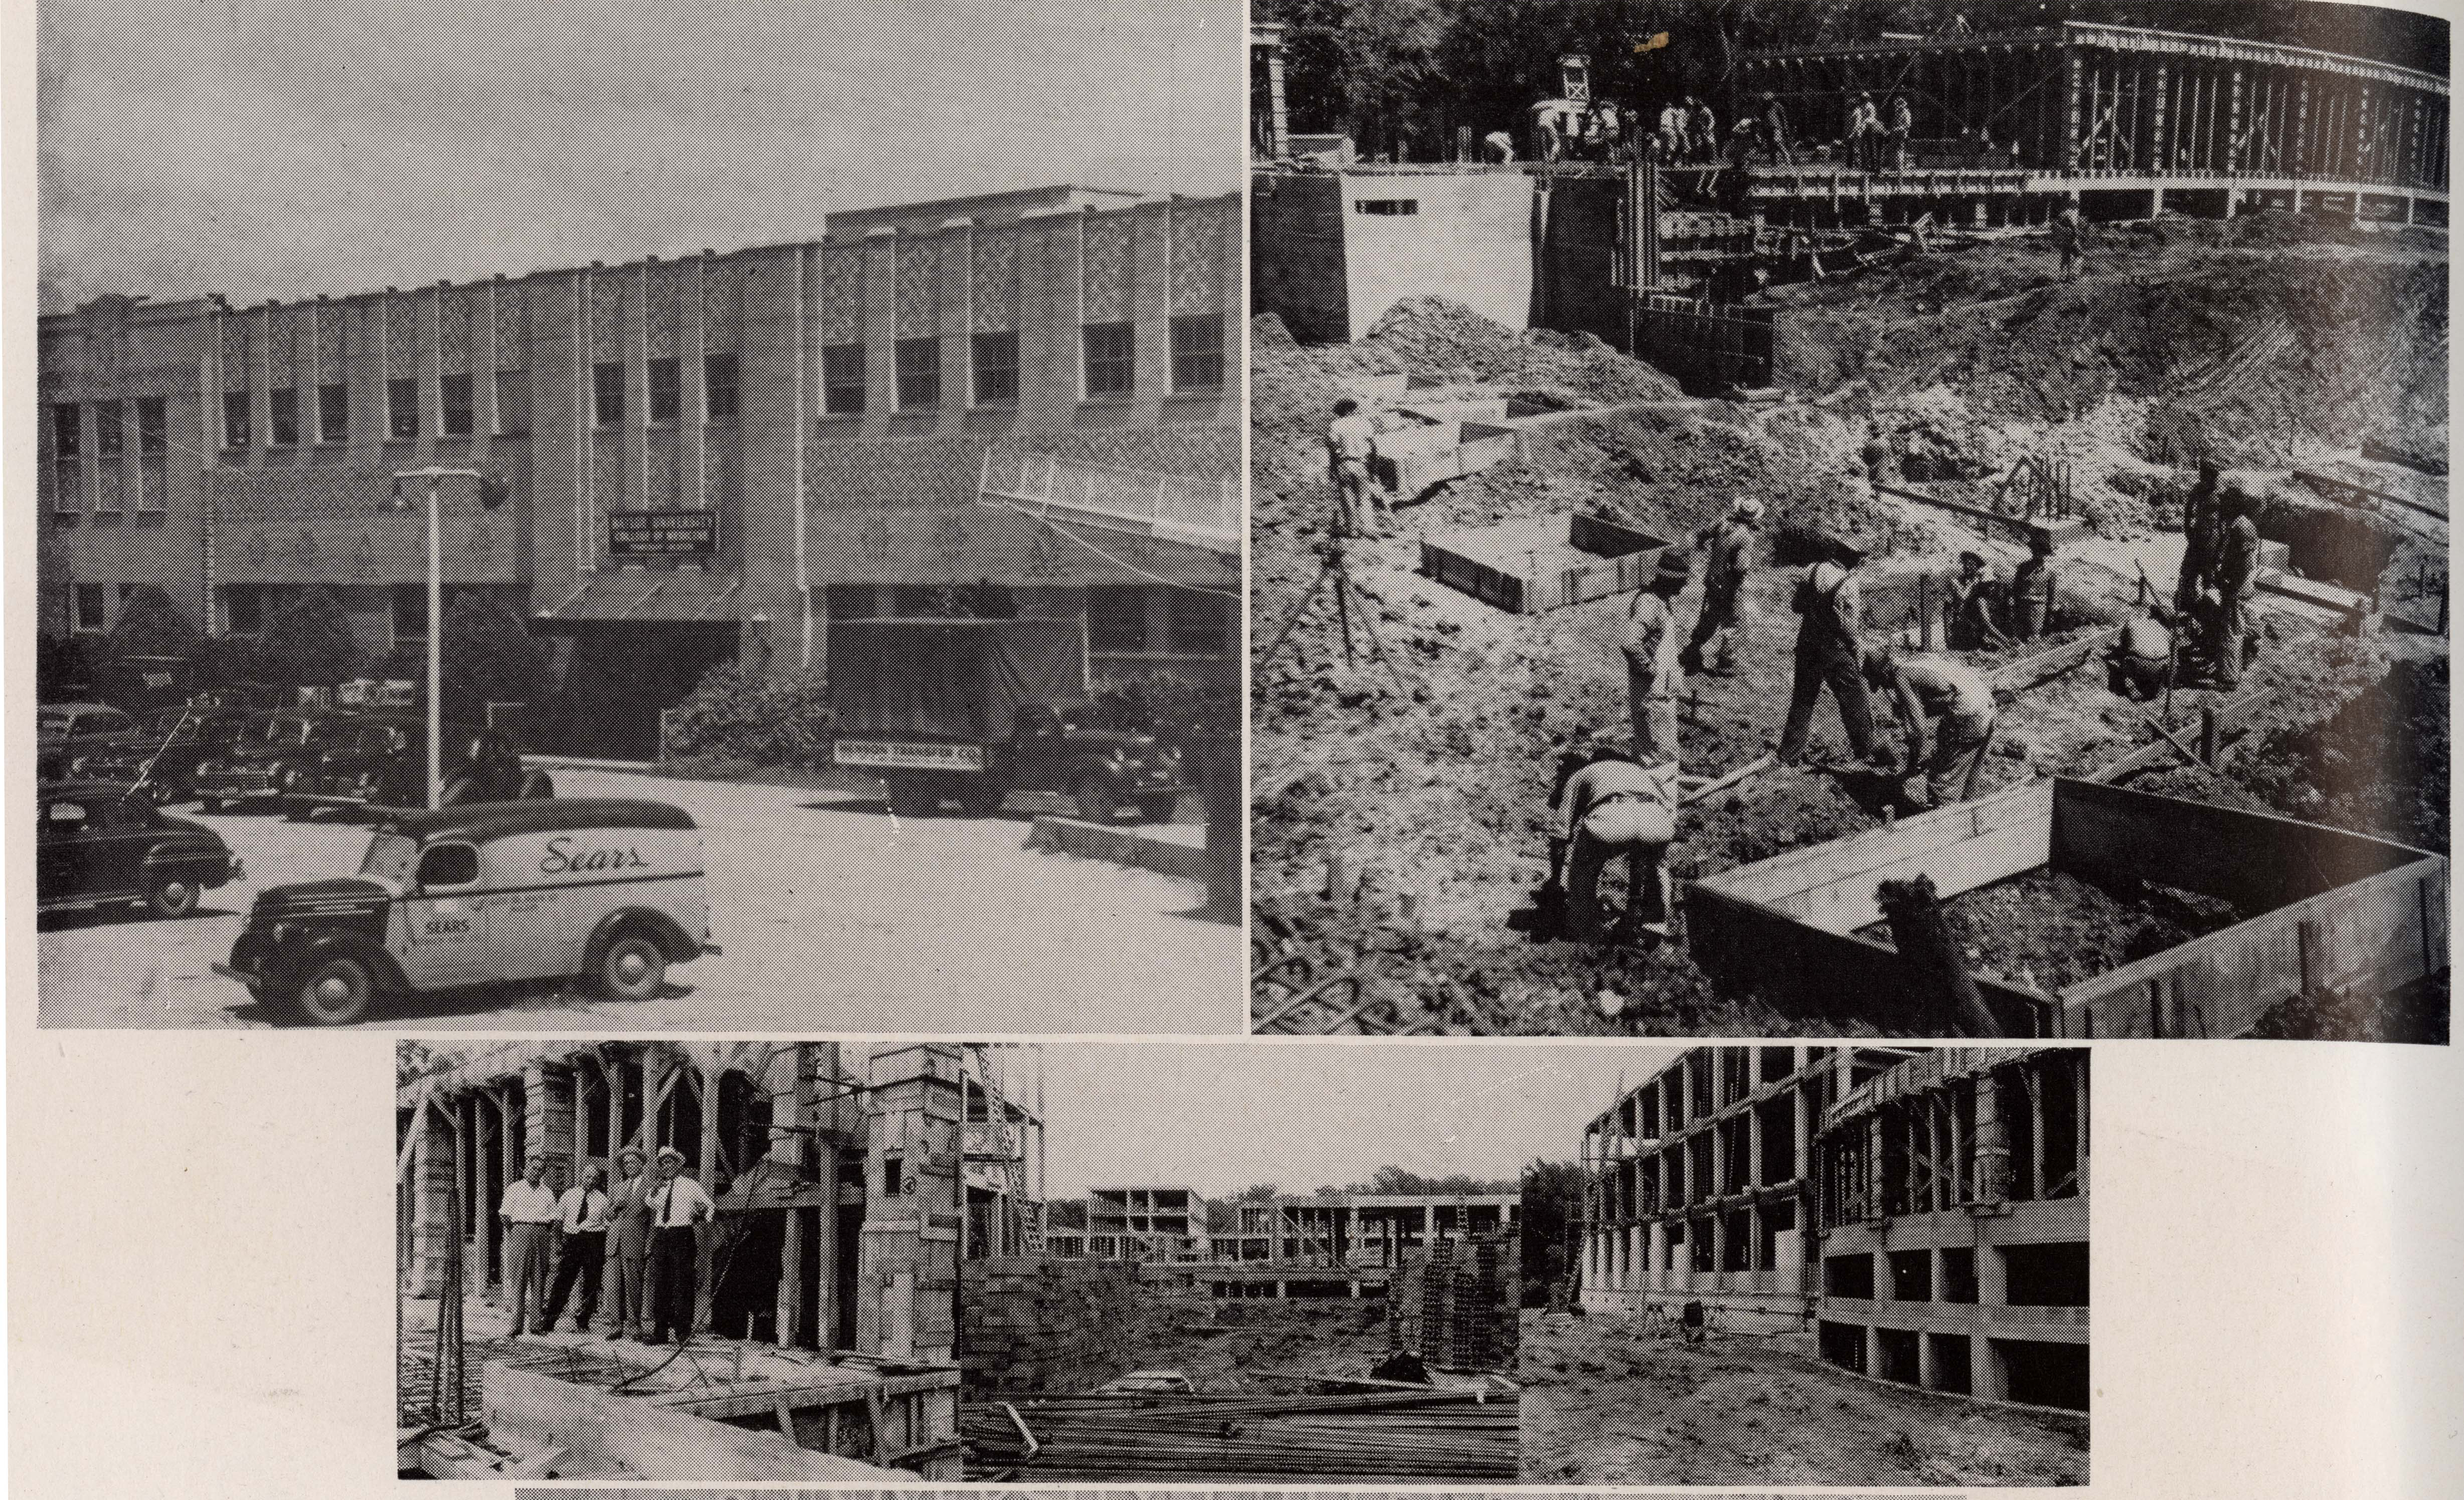 A collage from the 1948 Baylor University Round Up yearbook shows the progression of the College's history in Houston. Image courtesy Baylor College of Medicine Archives.